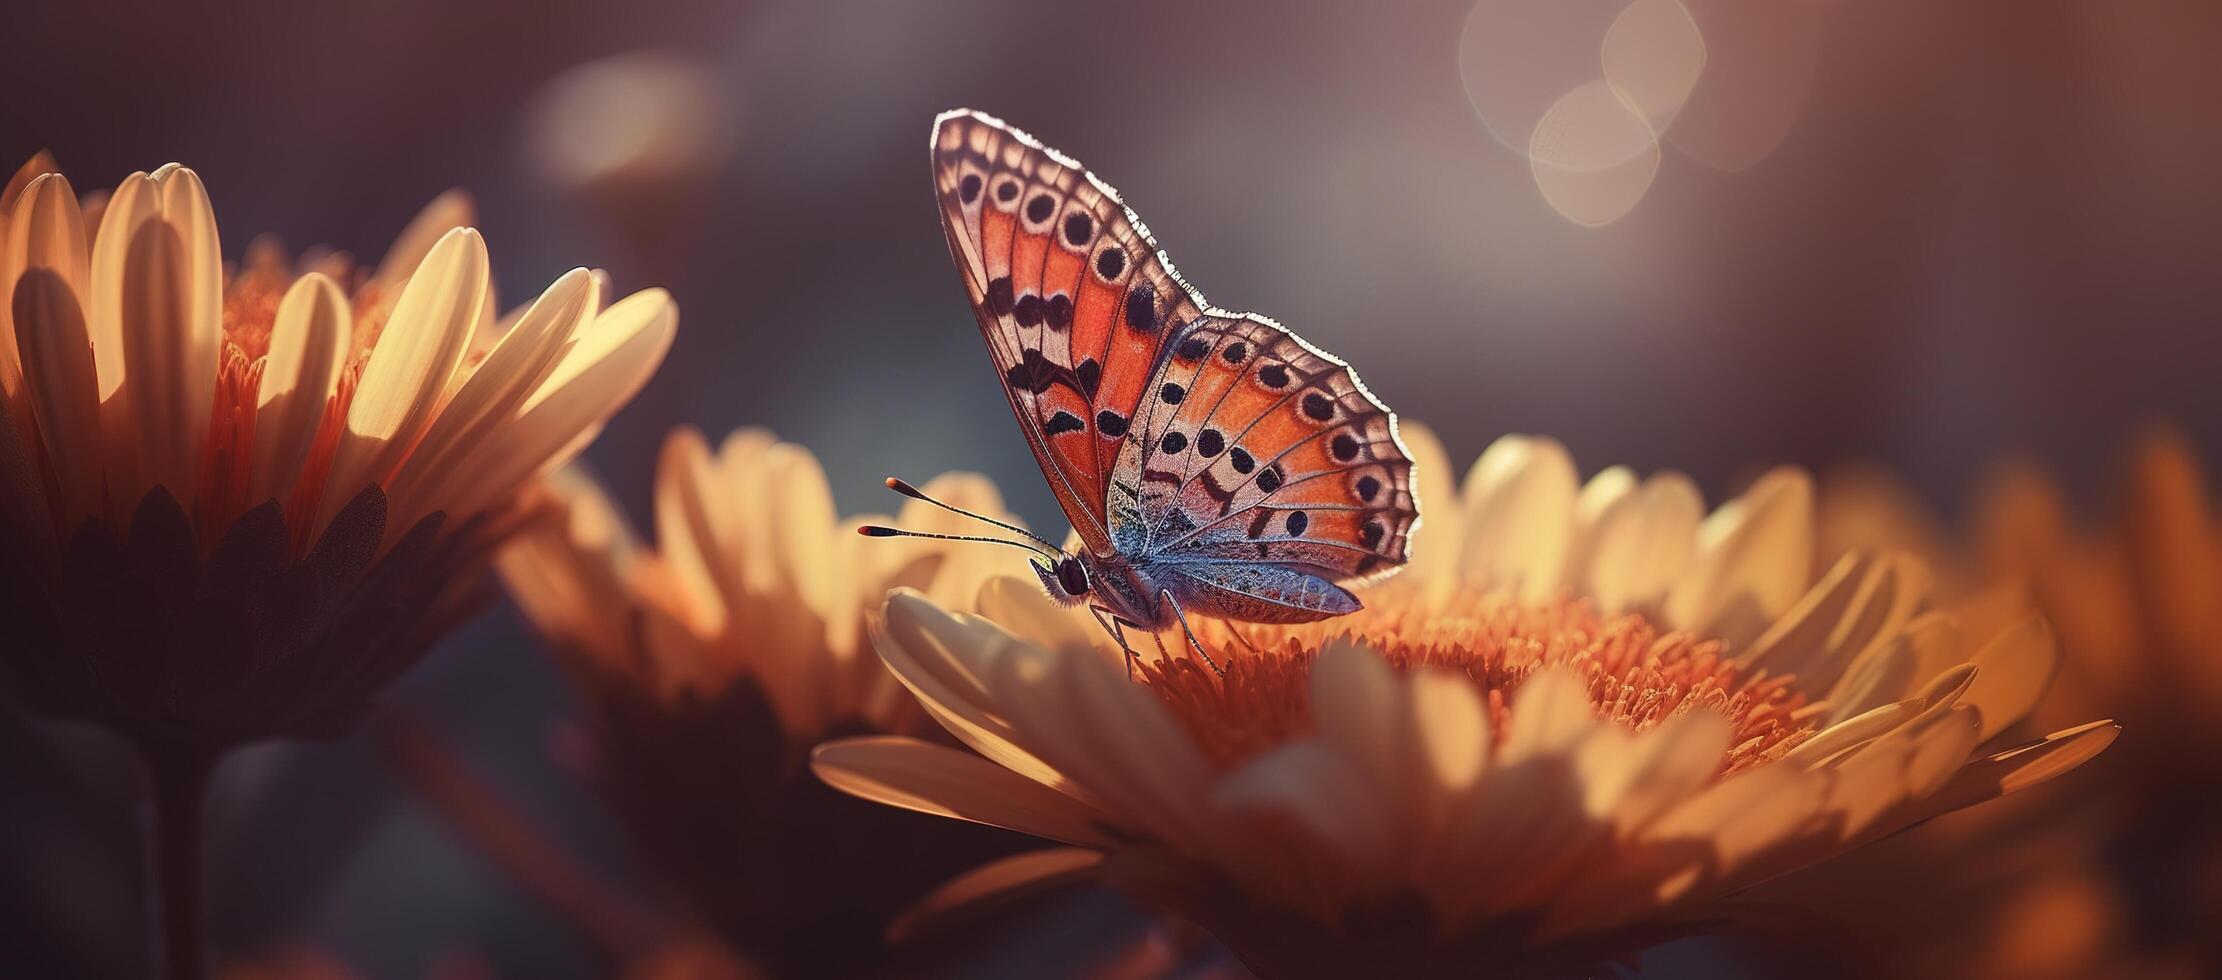 Field of daisies in golden rays of the setting sun in spring summer nature with an orange butterfly outdoors, photo